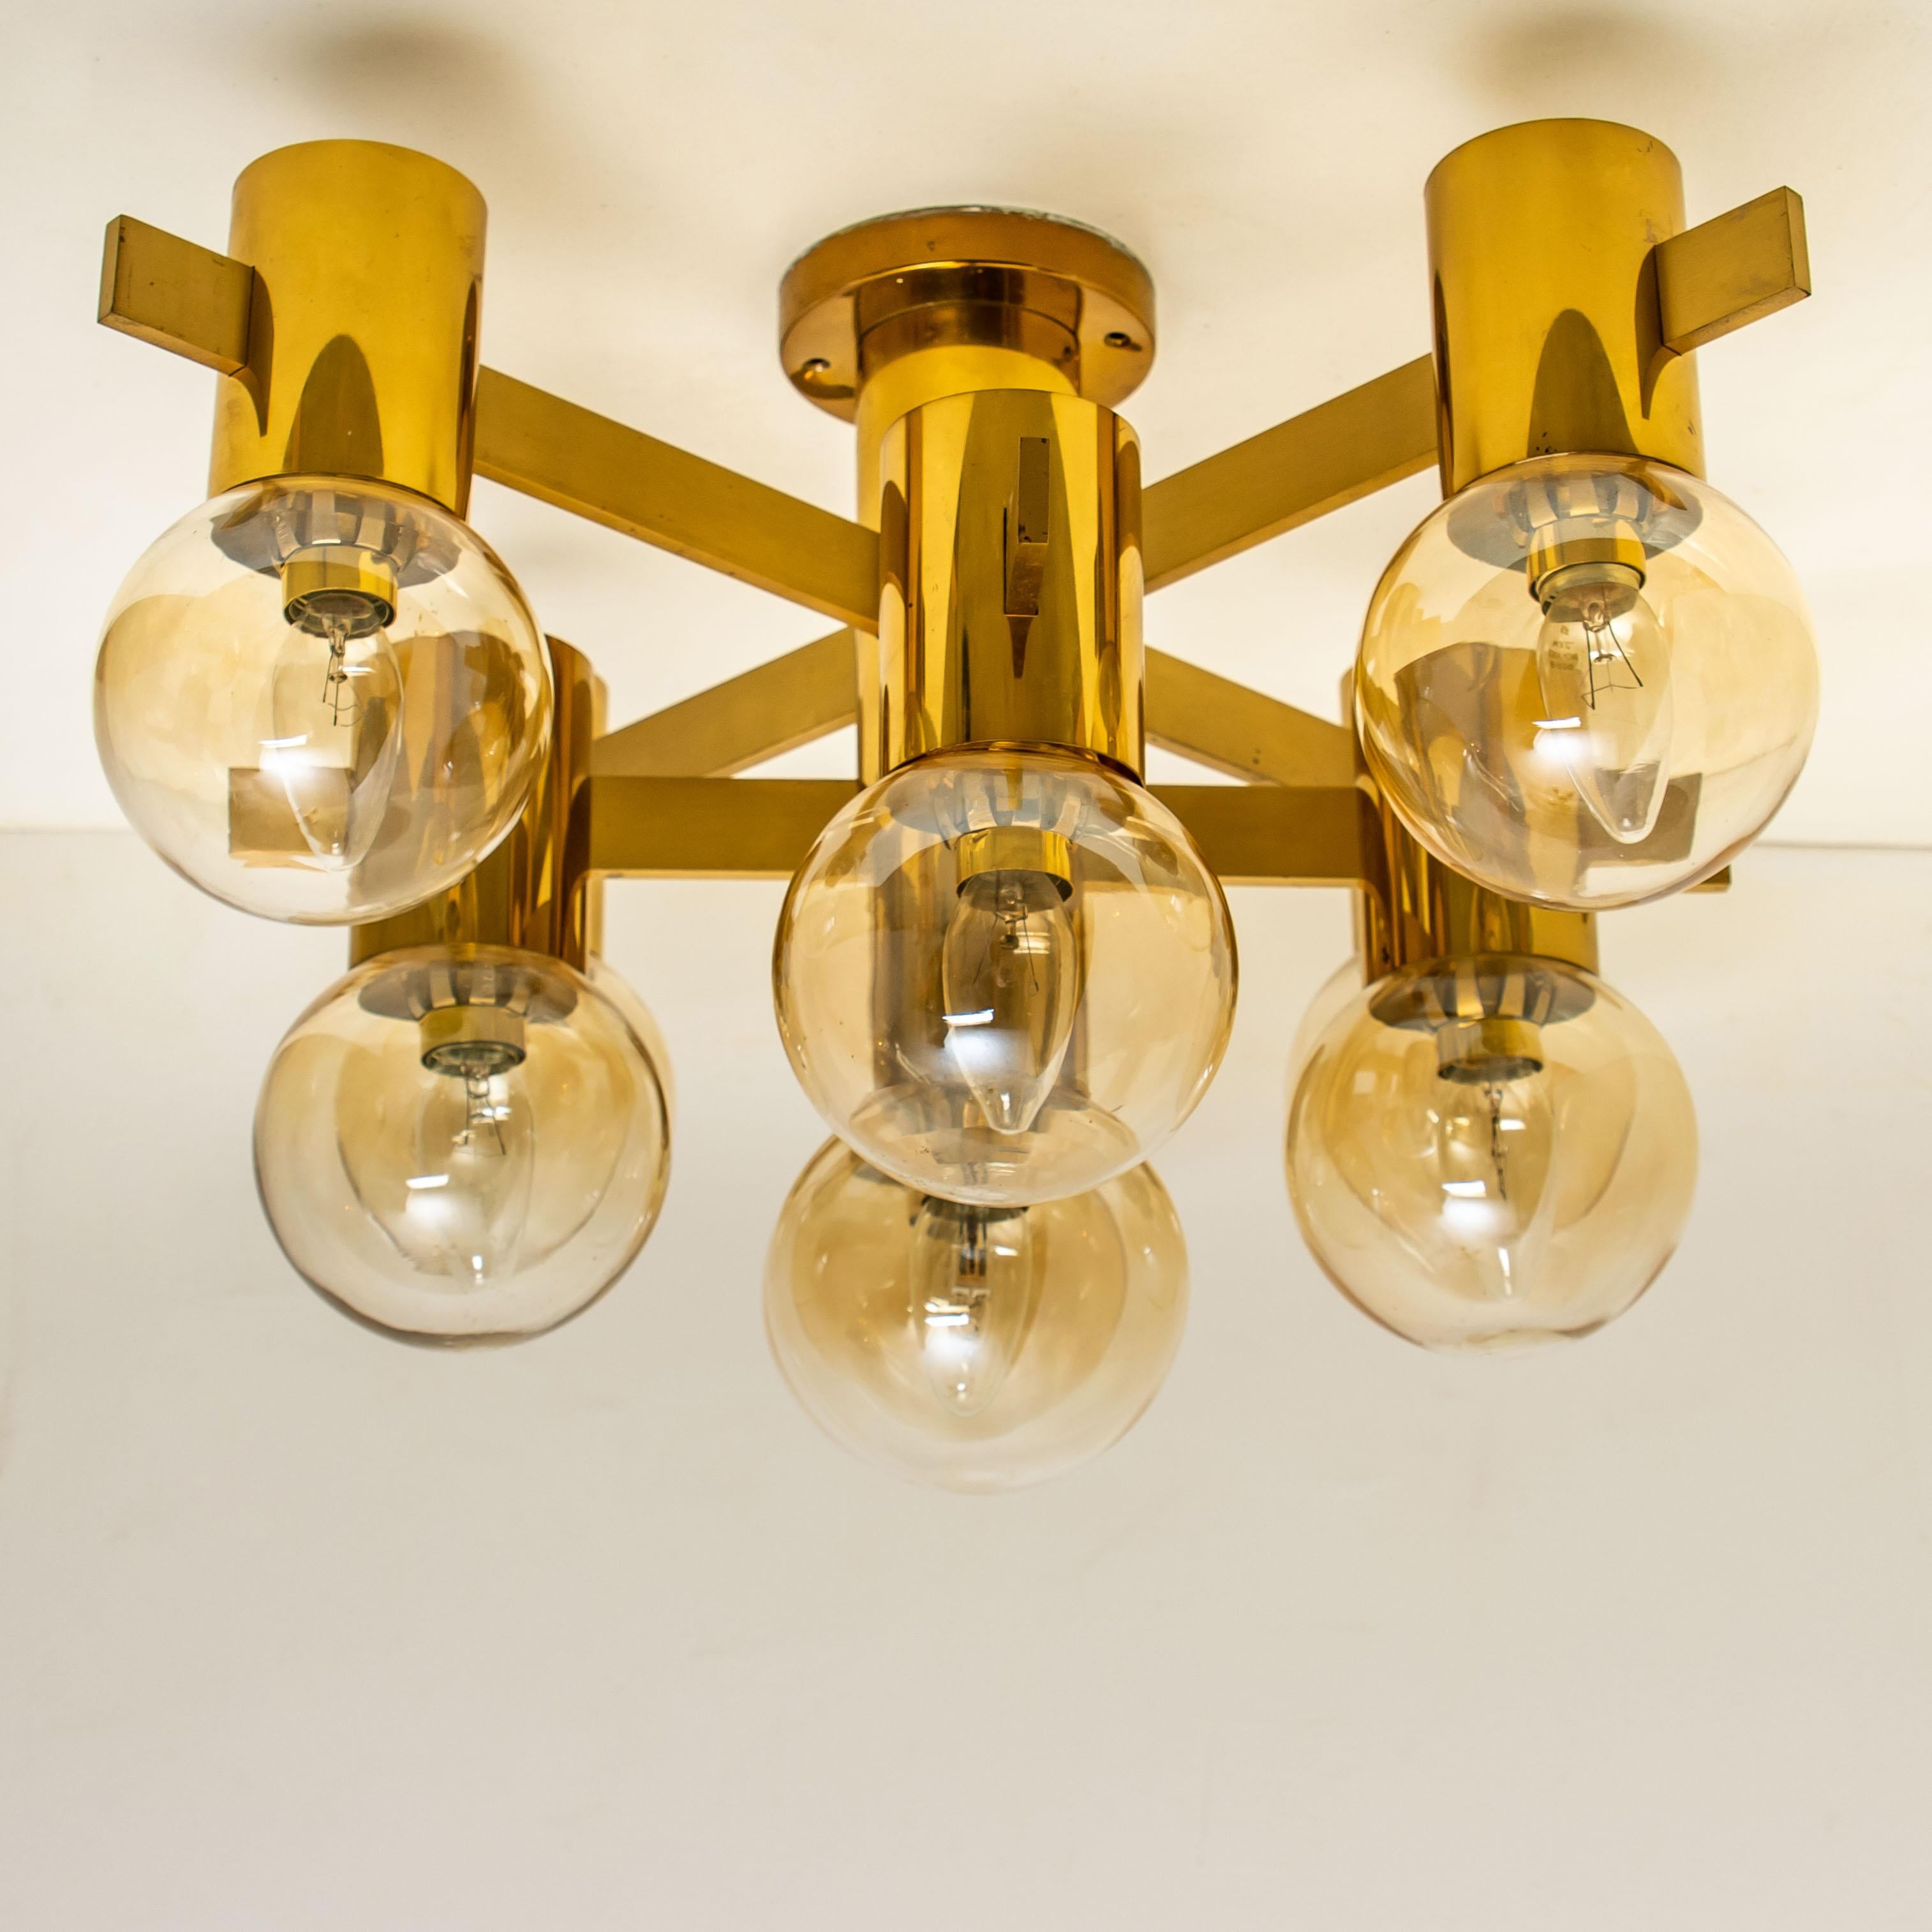 Set of Three Brass and Glass Light Fixtures in the Style of Jakobsson, 1960s For Sale 4